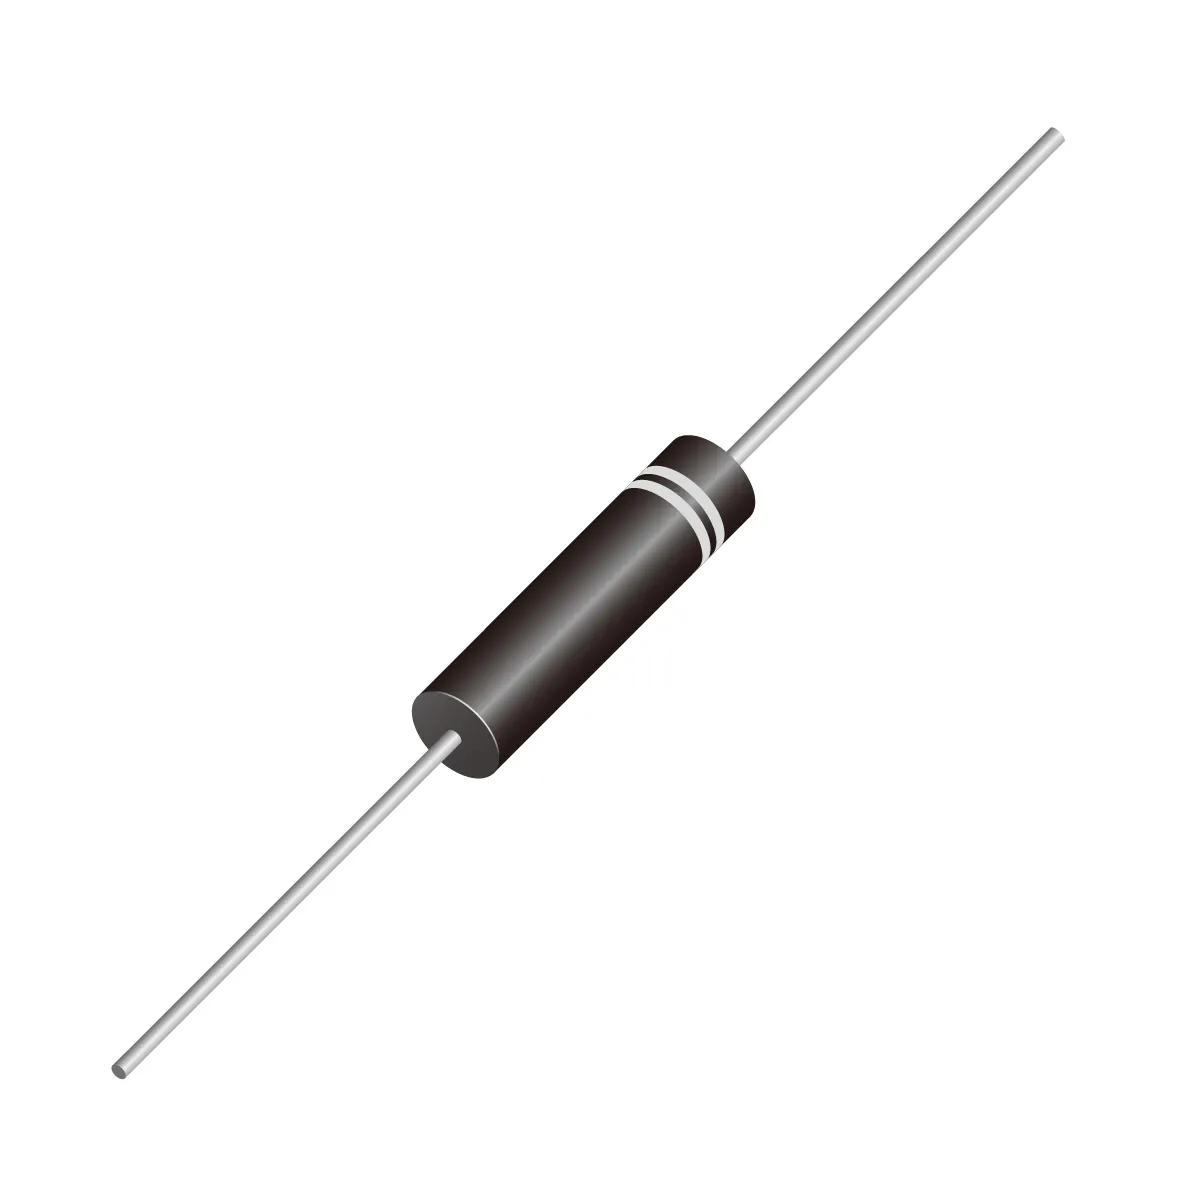 Leadsun Hoogspanning Diode CL03-20 Hoogspanning Axiale Lead Power Diodes